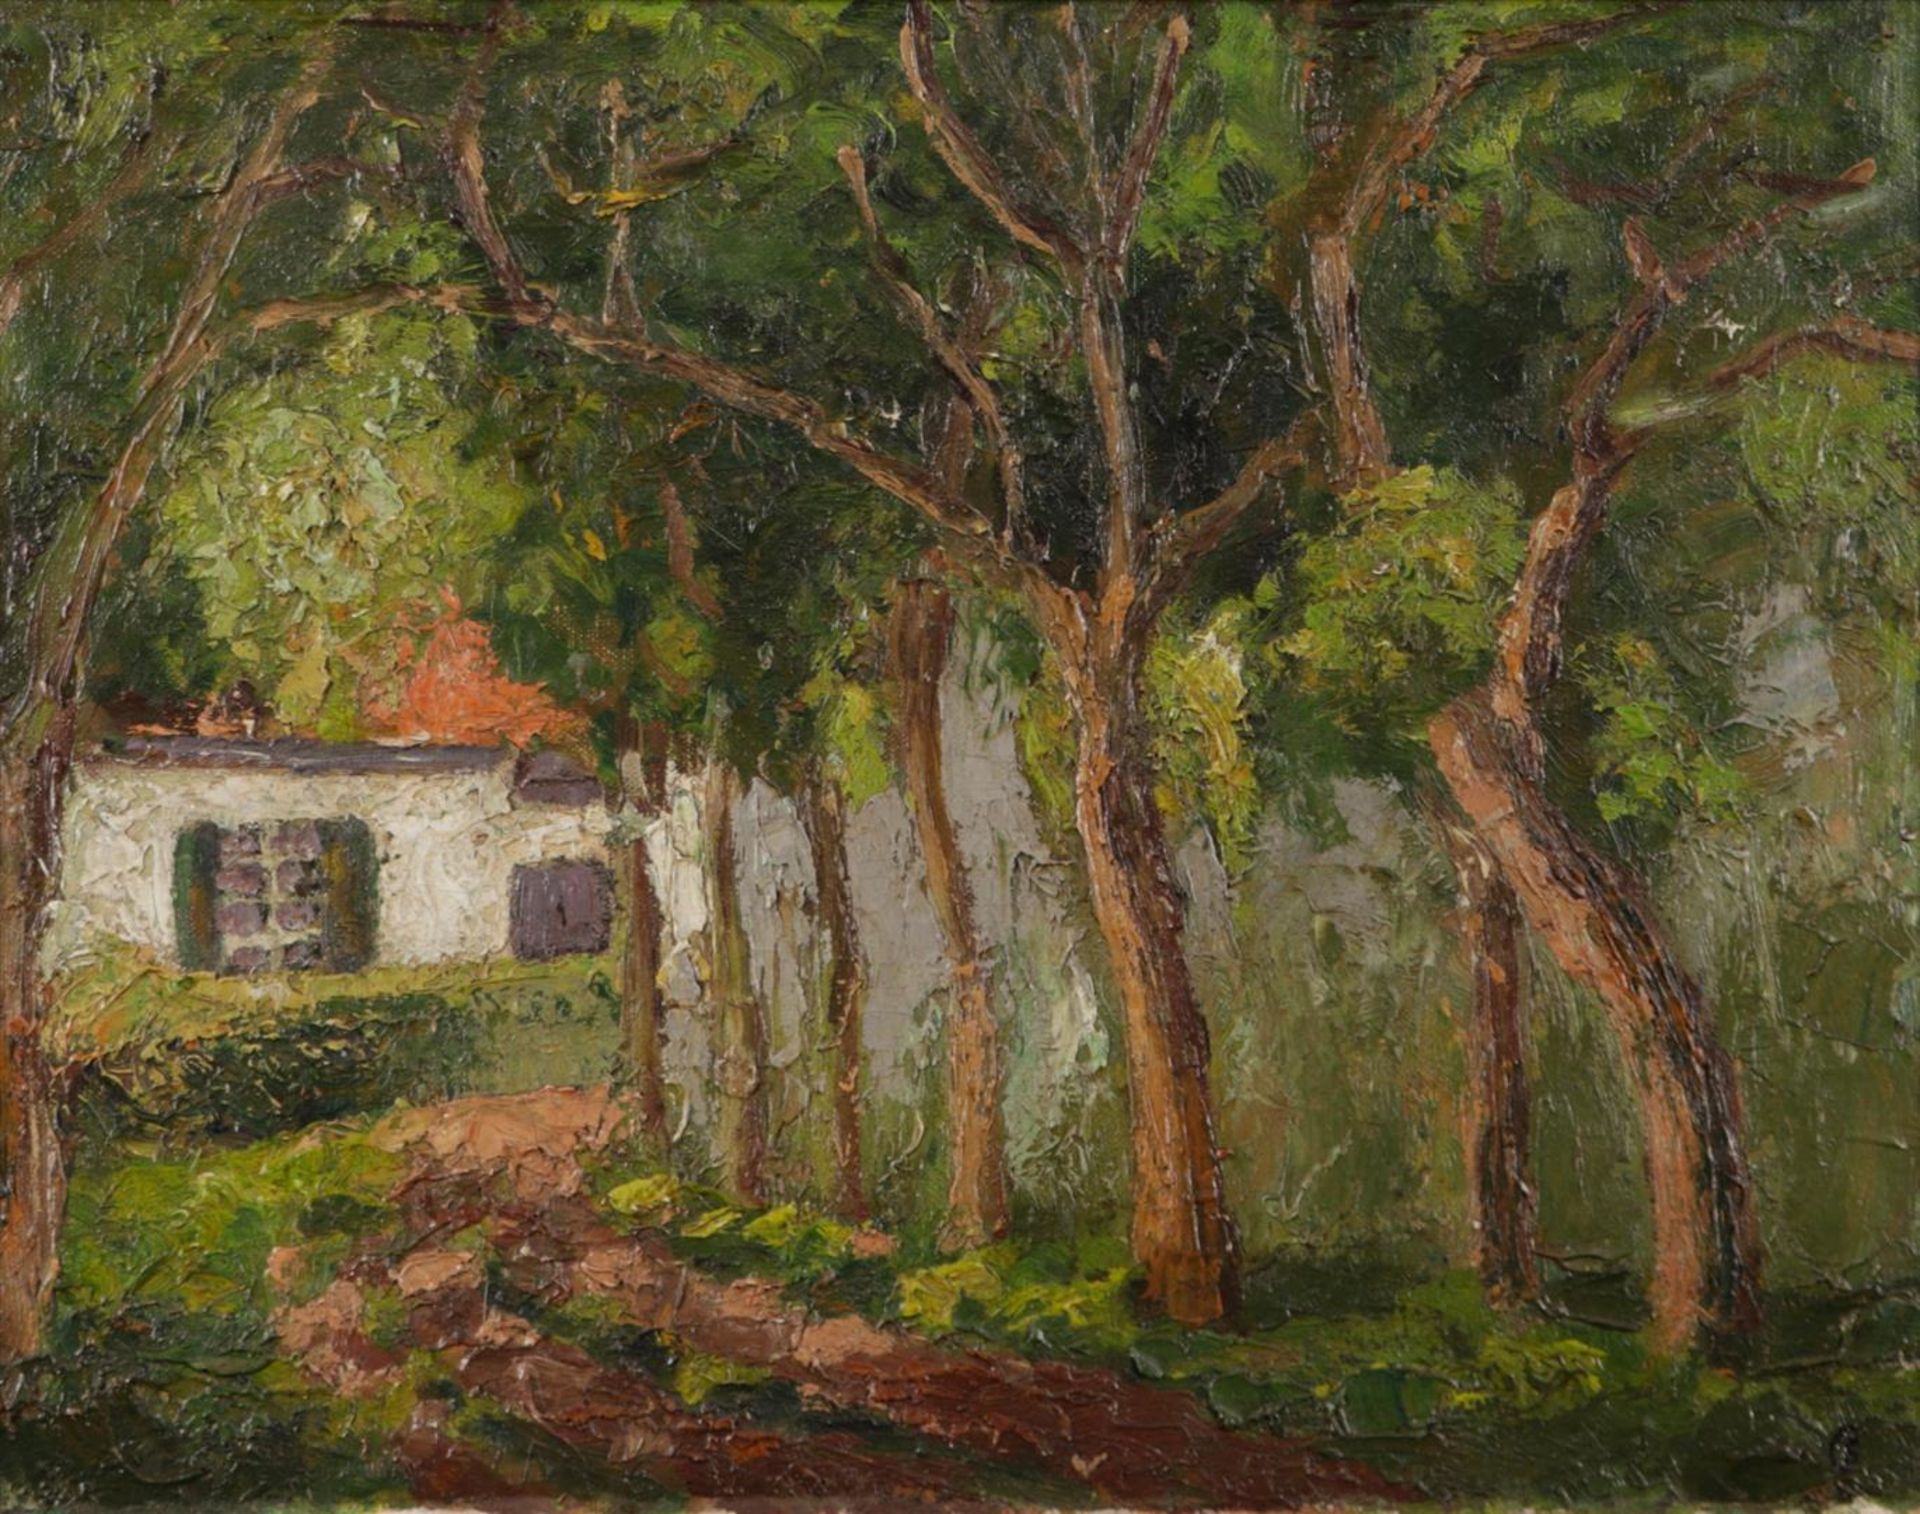 Charles Swyncop (Brussels 1895 - 1970), Houses among trees, signed with monogram (bottom right), oil